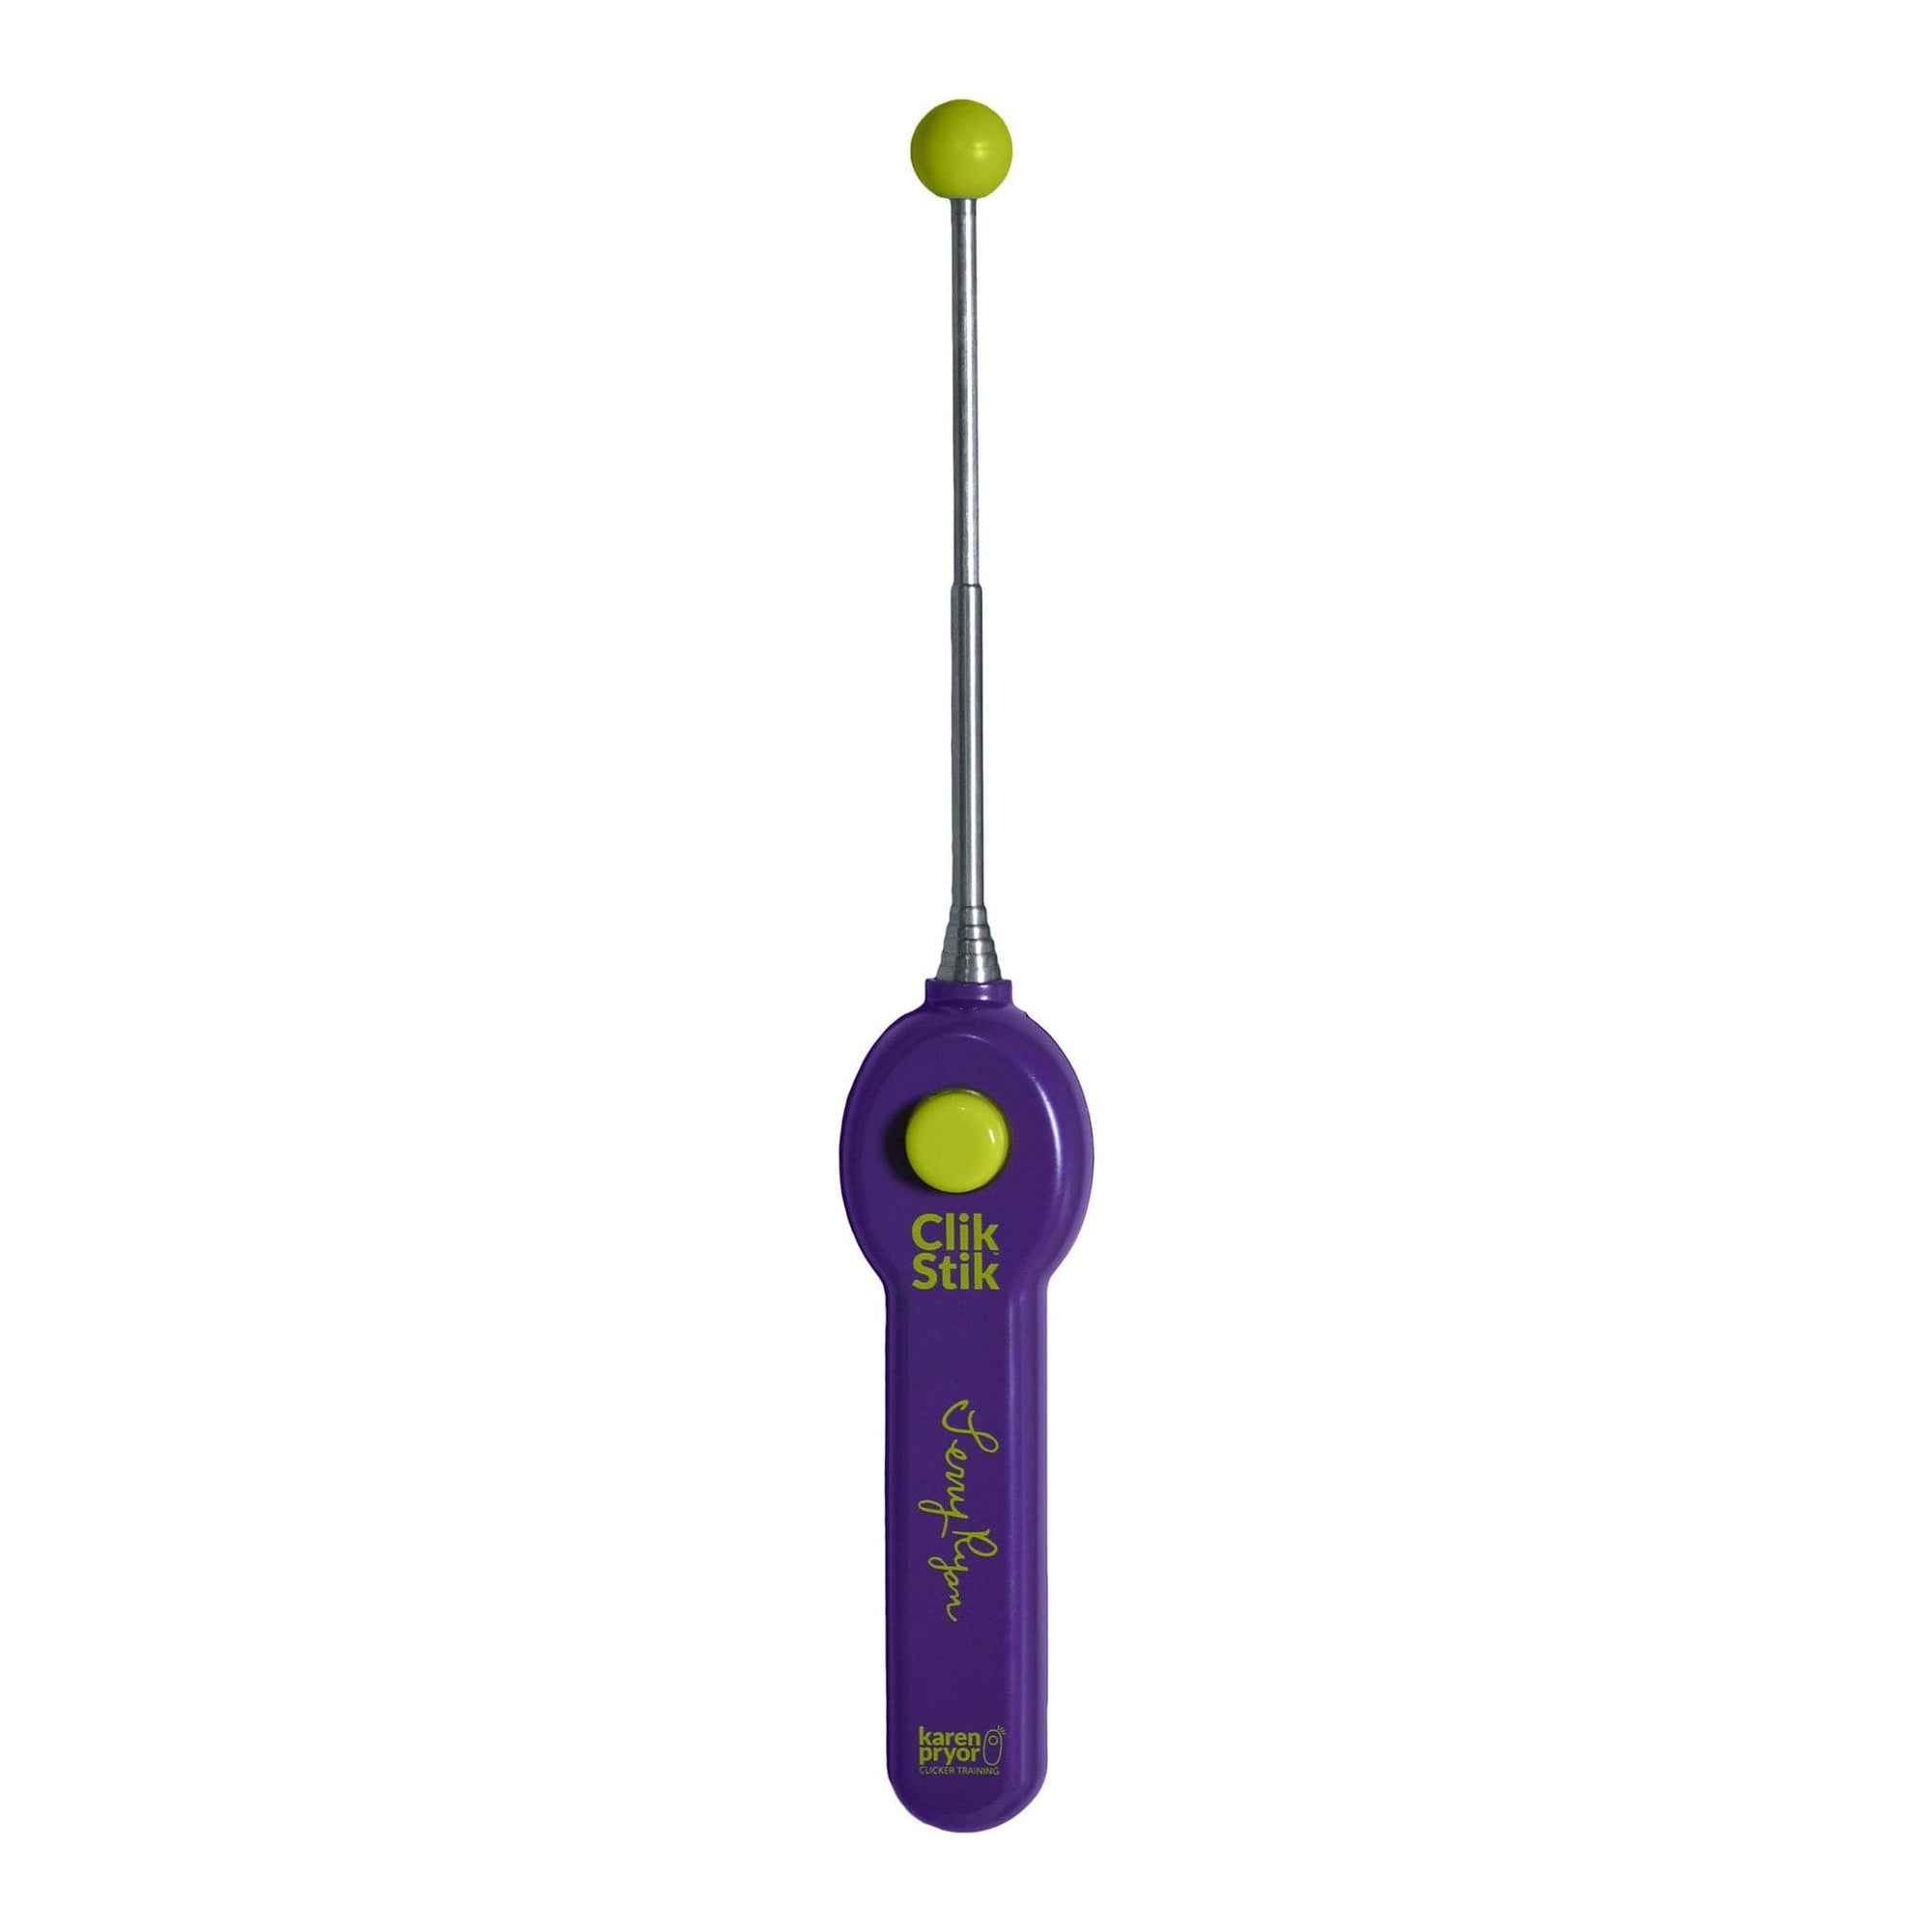 Picture of the Clik Stik. It is a purple base with a green button and a green target on the end of a telescoping metal piece.